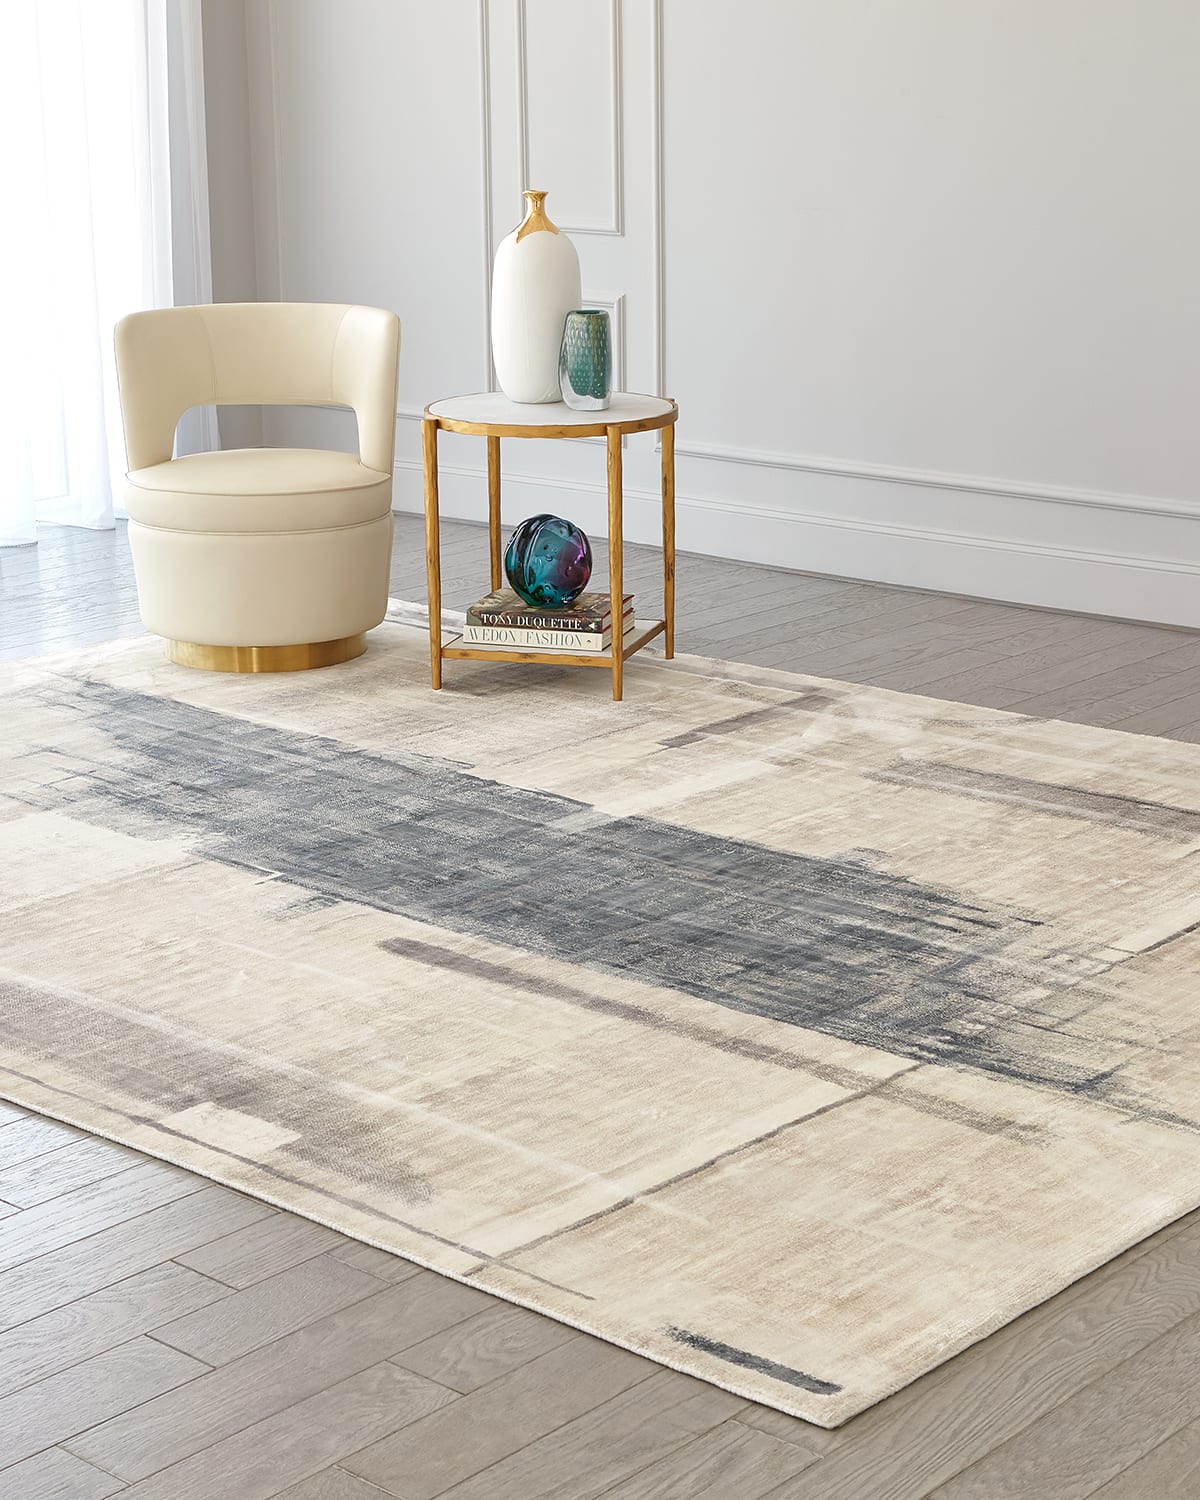 George Sellers For Global Views Art Hand-woven Rug, 10' X 14' In Grey